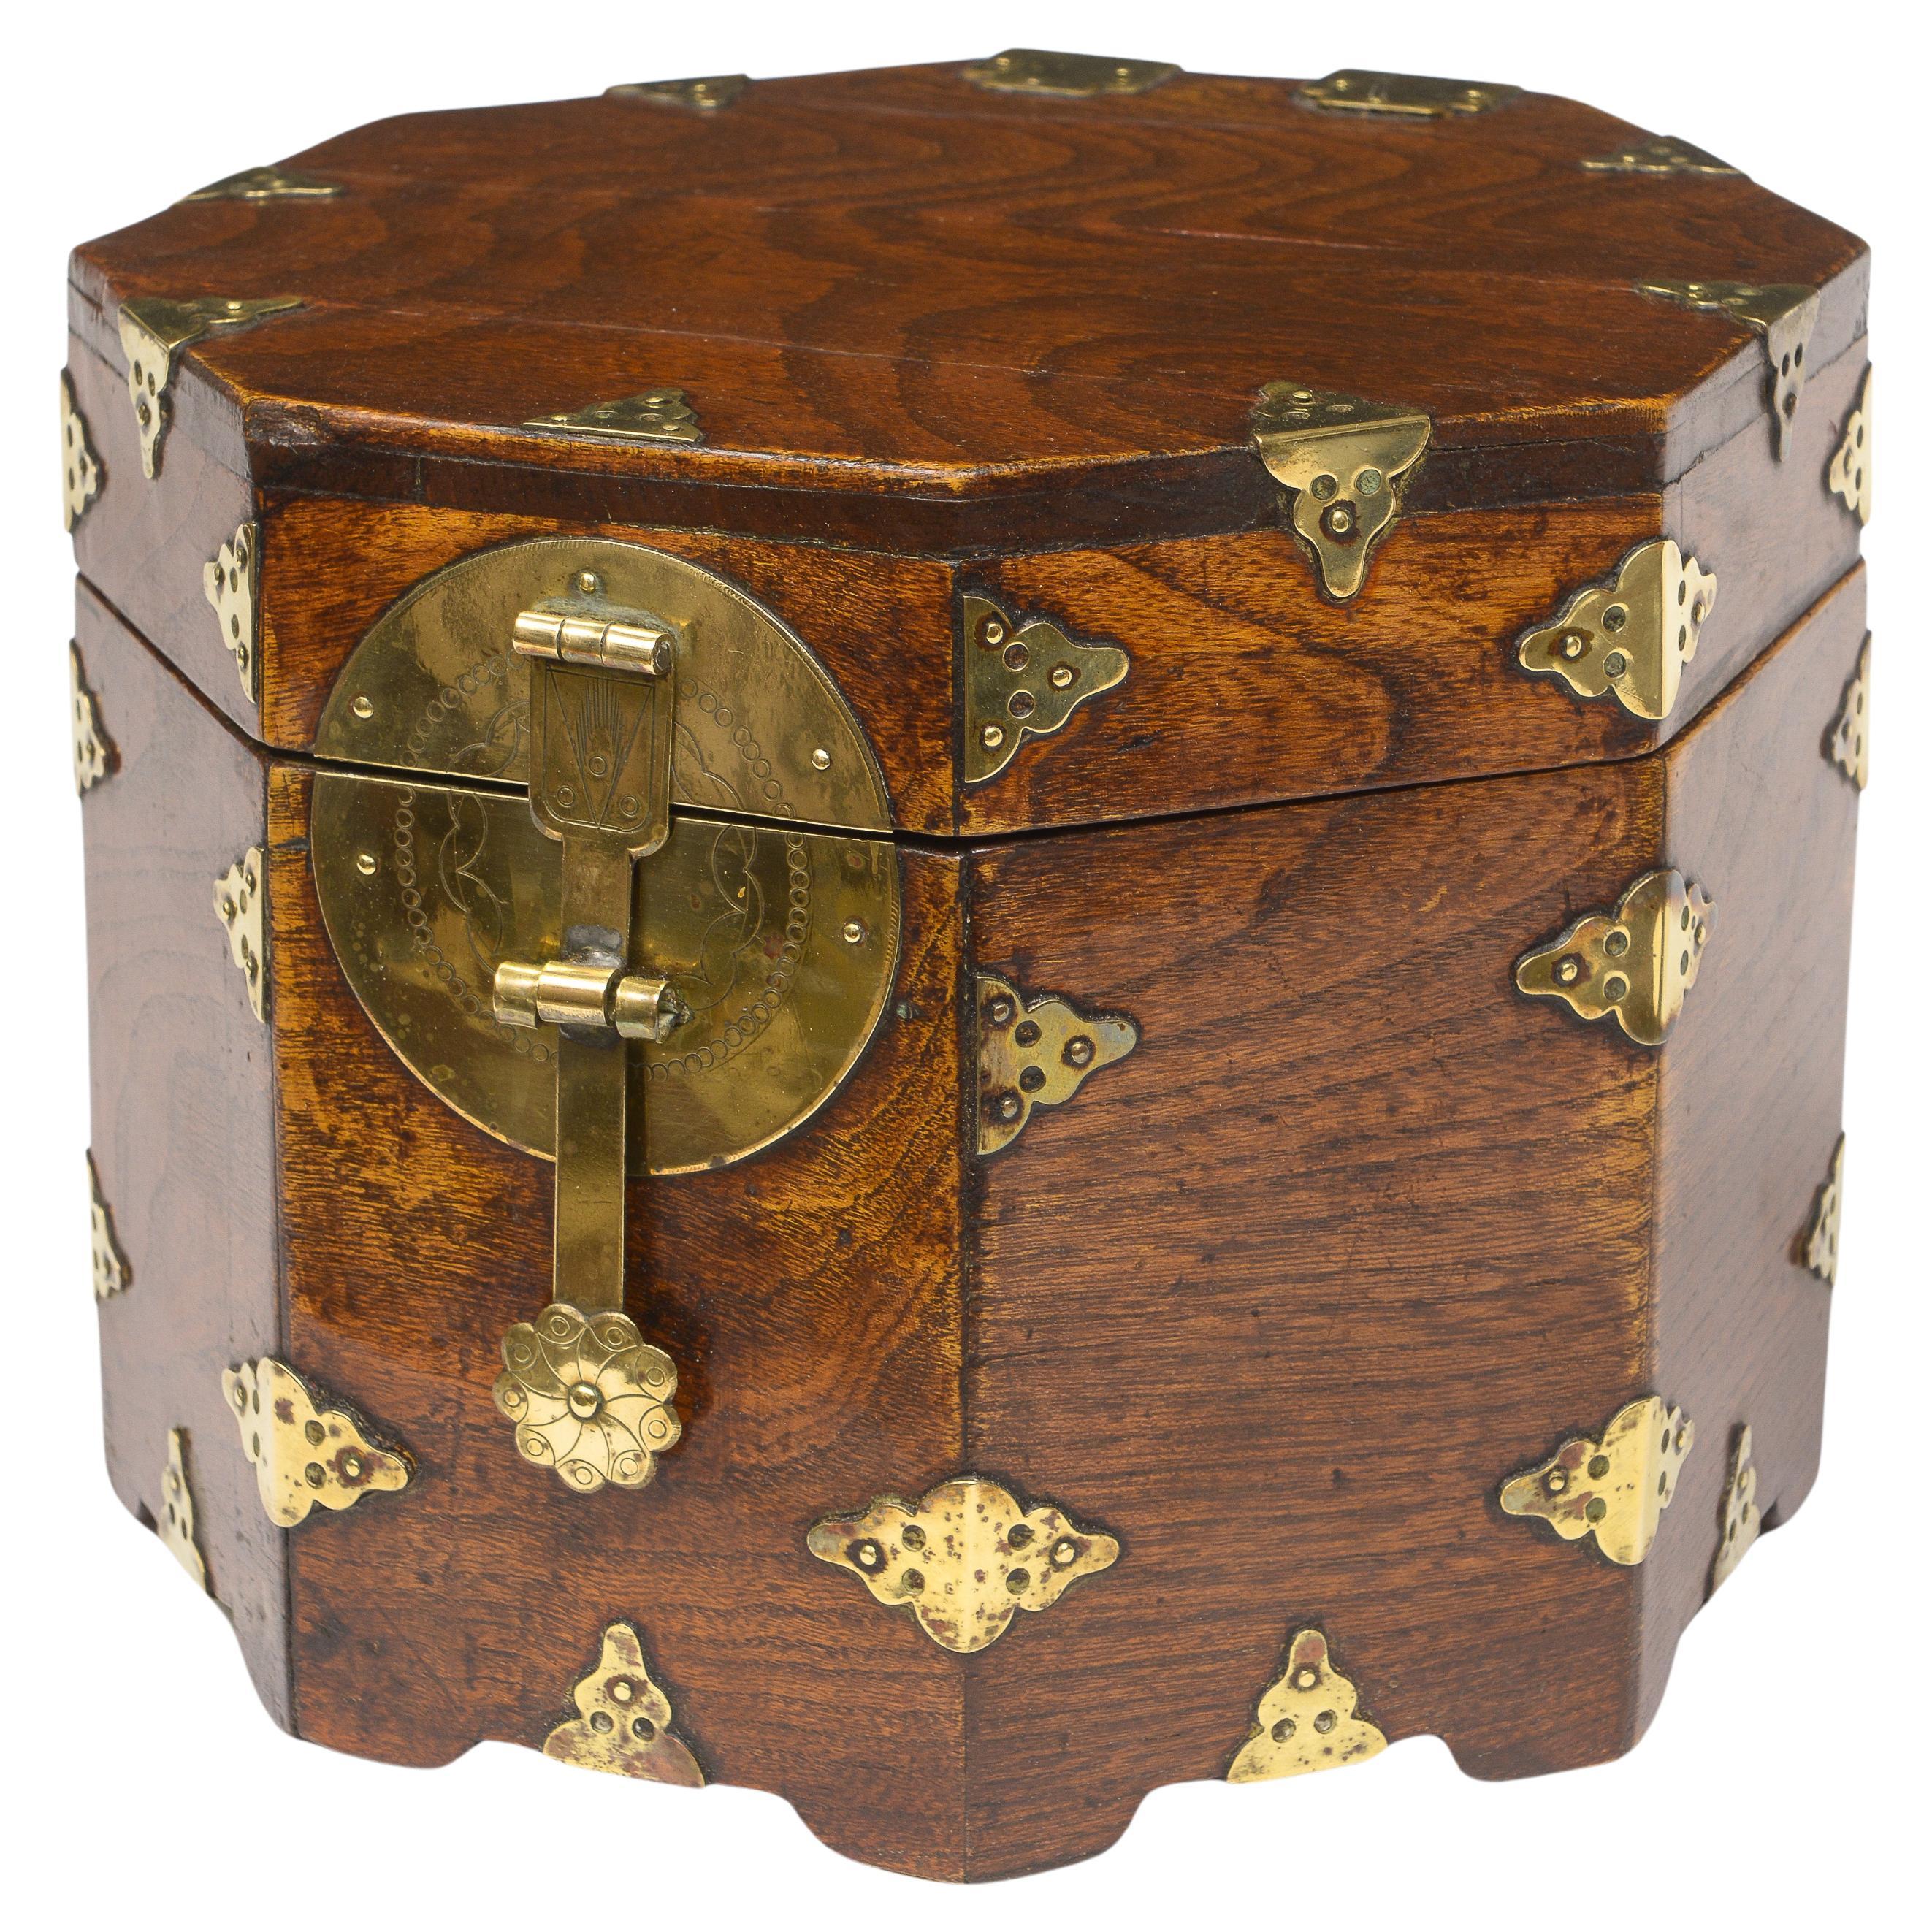 What are octagon boxes used for?